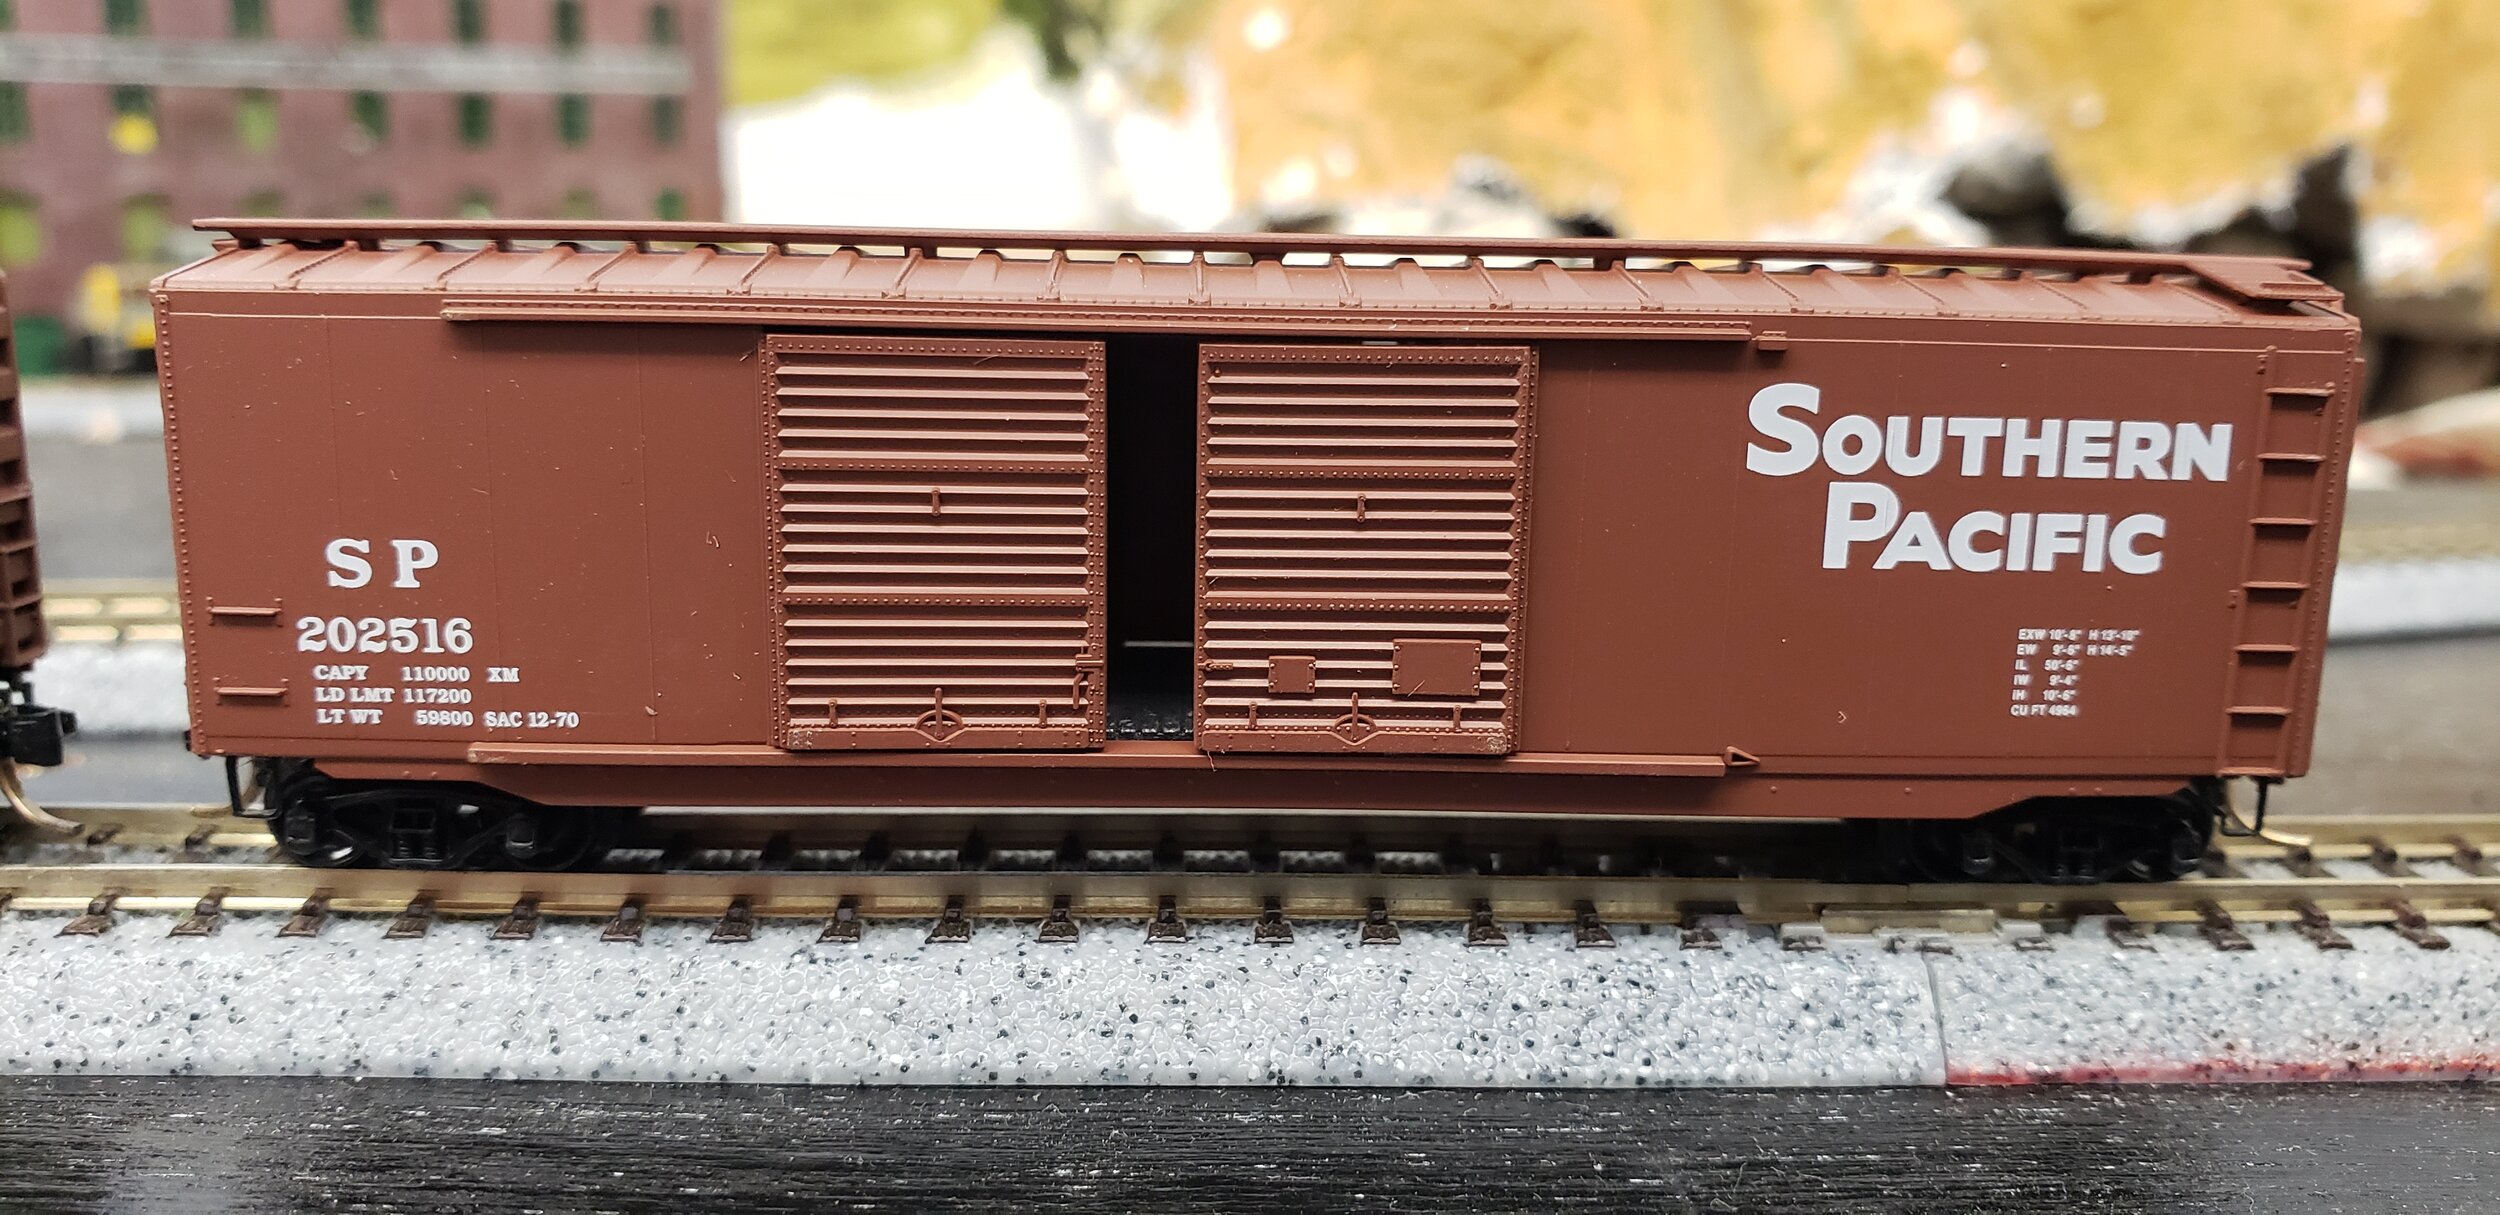 Micro-Trains # 03453430 Union Pacific 50' Standard Boxcar Runner Pack #145 Car 